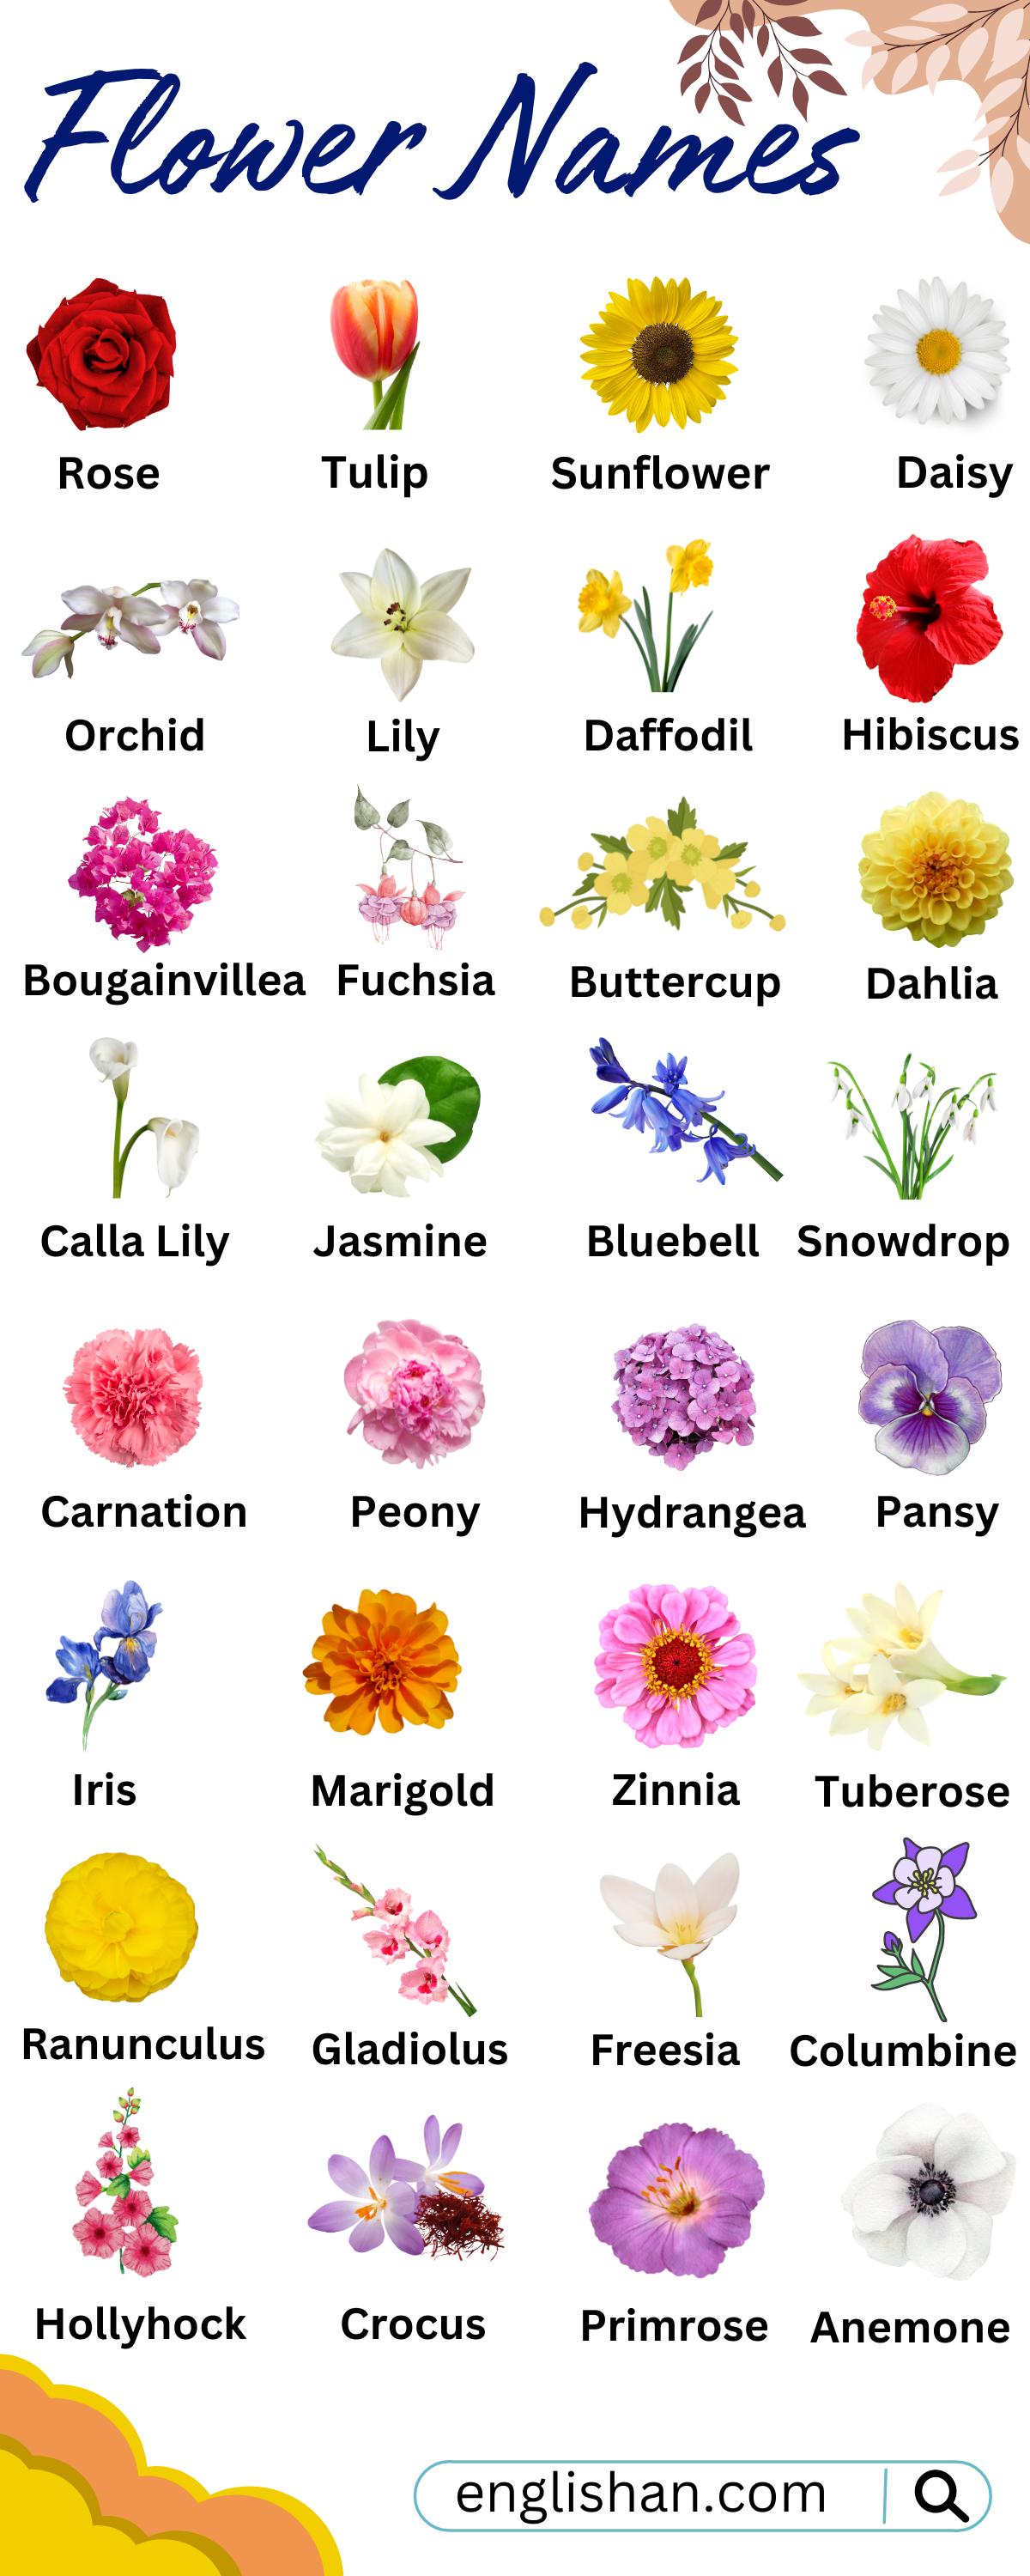 Flowers Names With Images | Best Flower Site